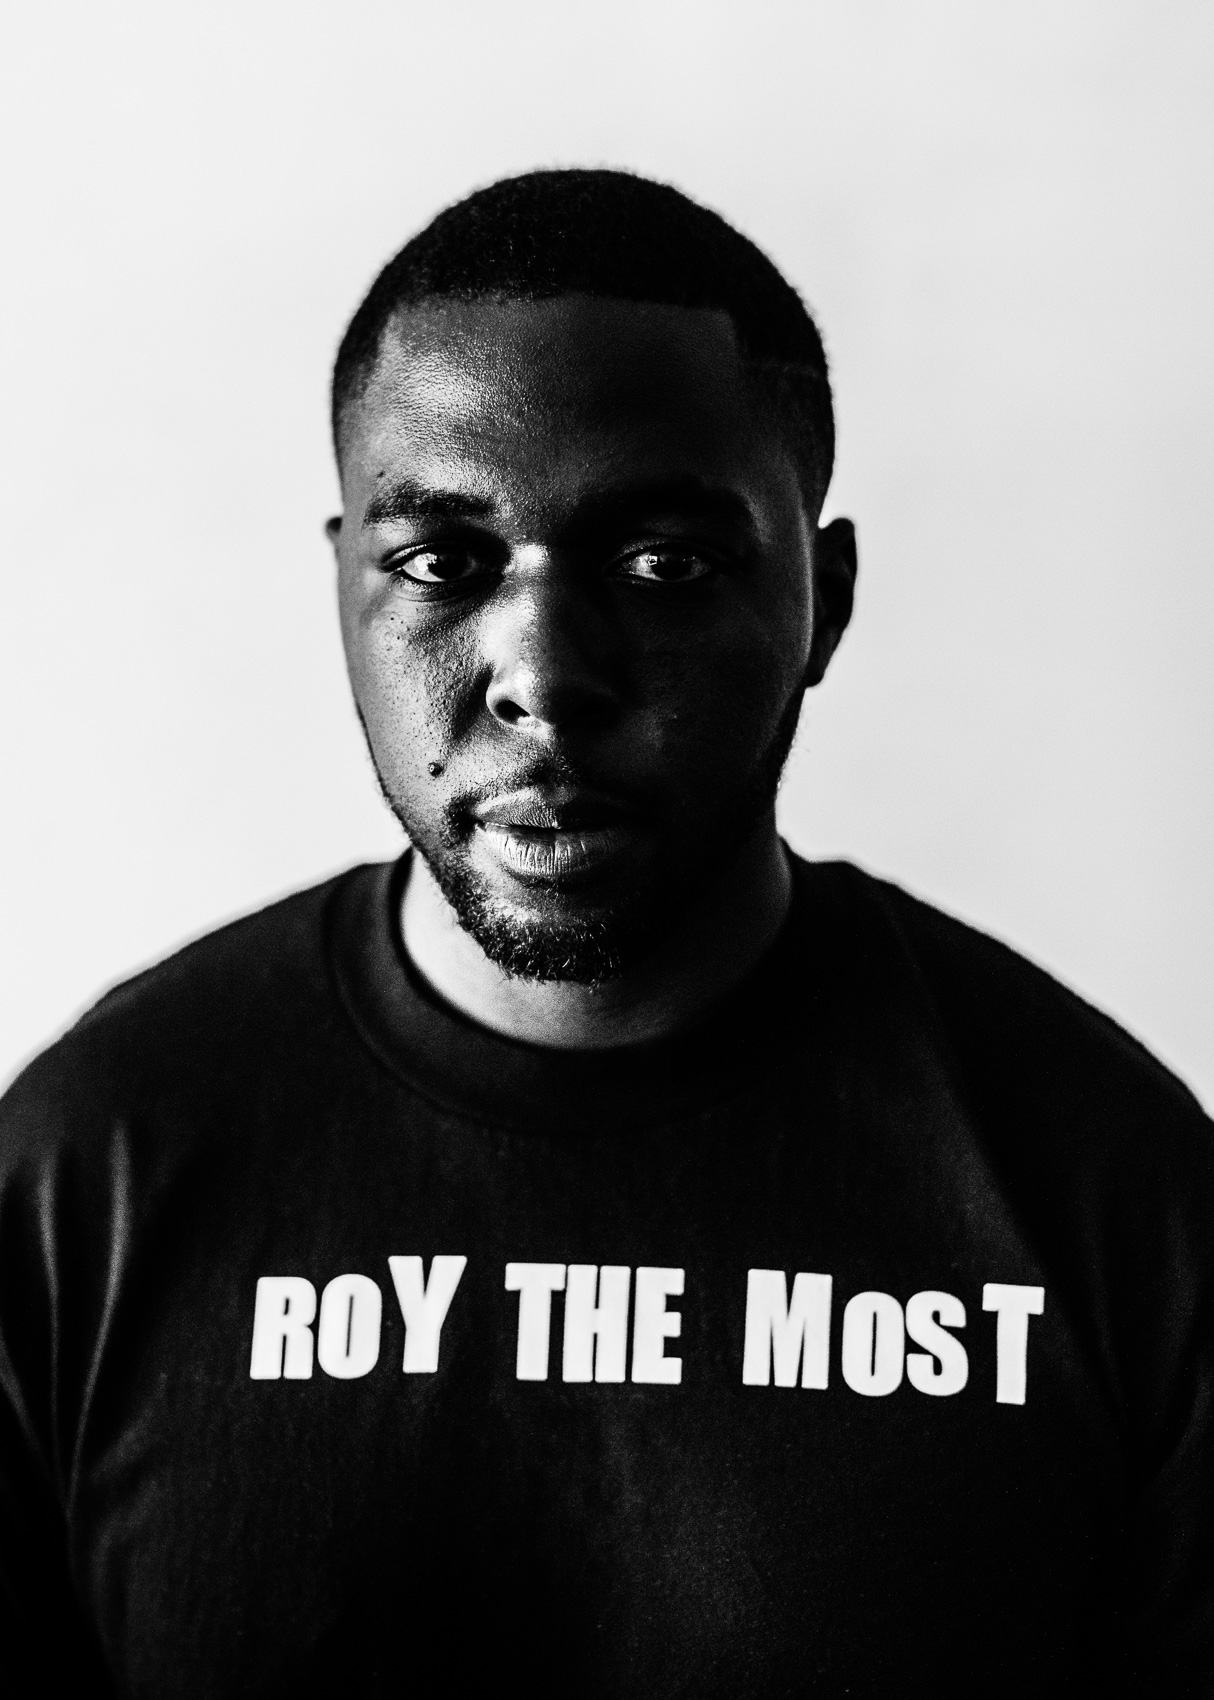 Roy The Mo$t, hip hop artist | Los Angeles | Editorial and Commercial Photographer Patrick Strattner